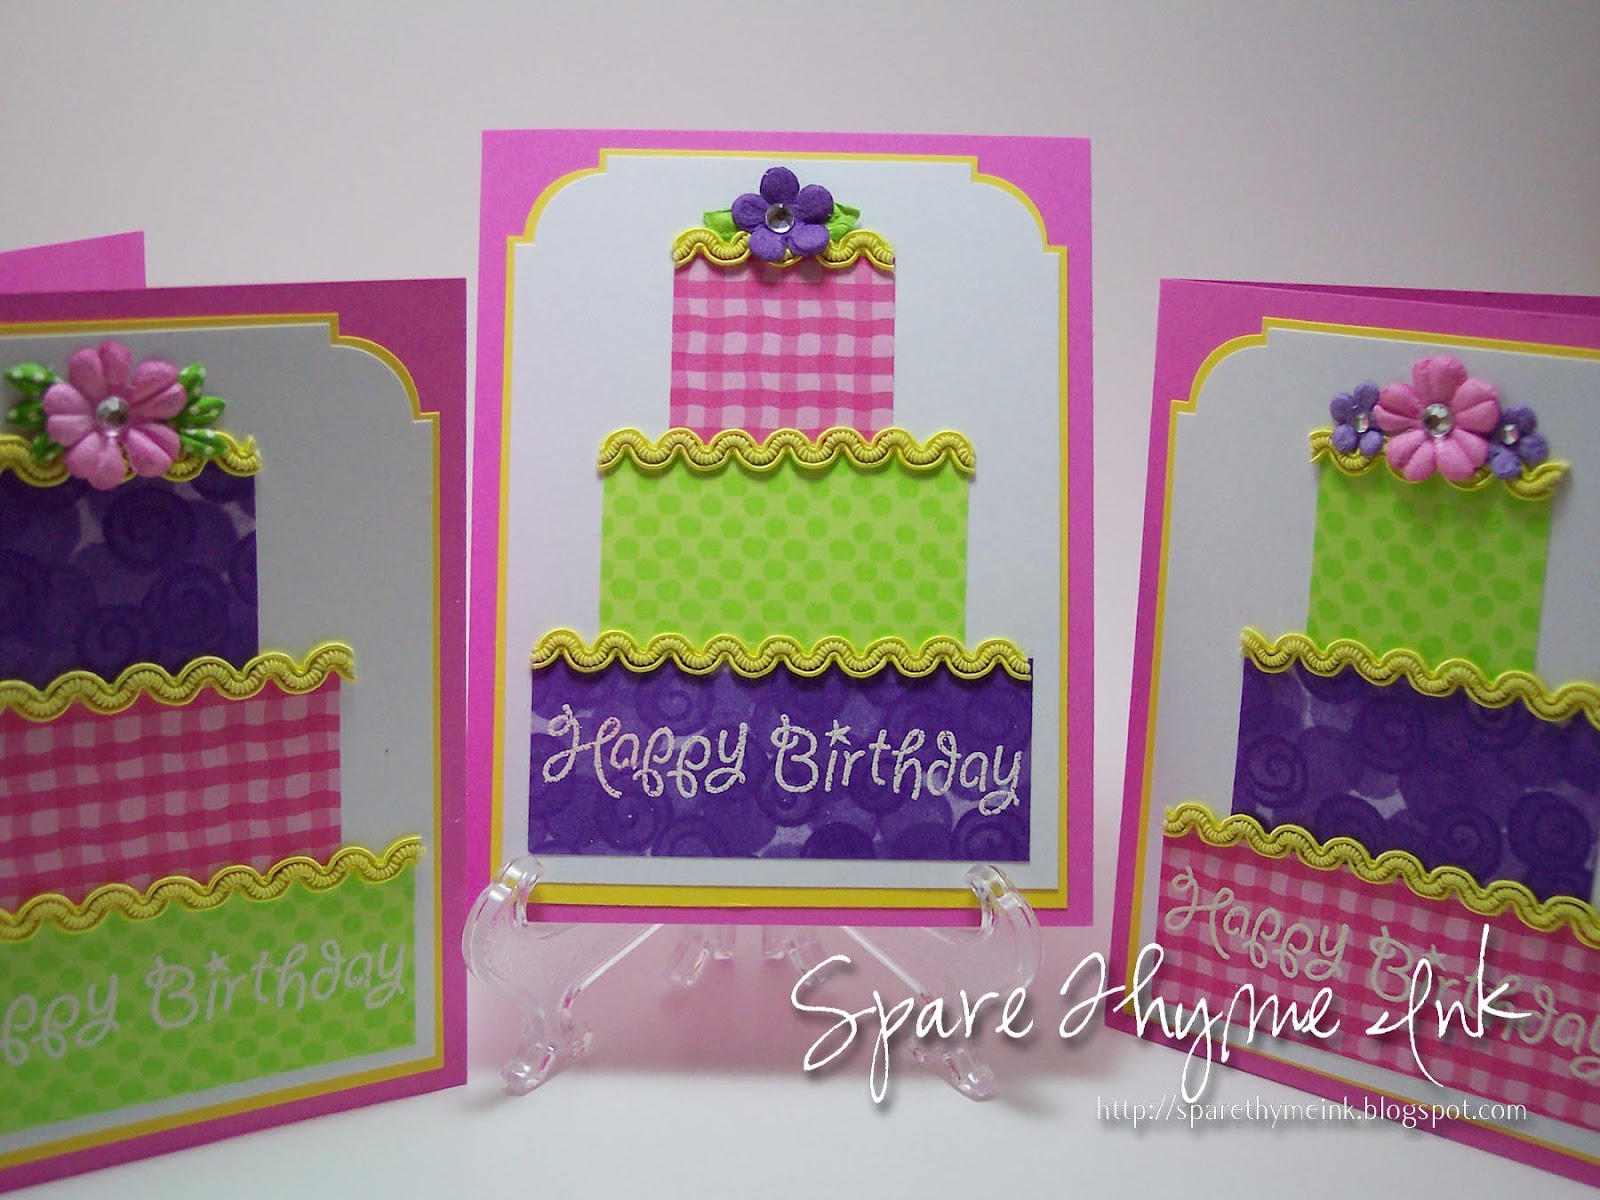 Spare Thyme Ink: Easy Peasy Cake Card